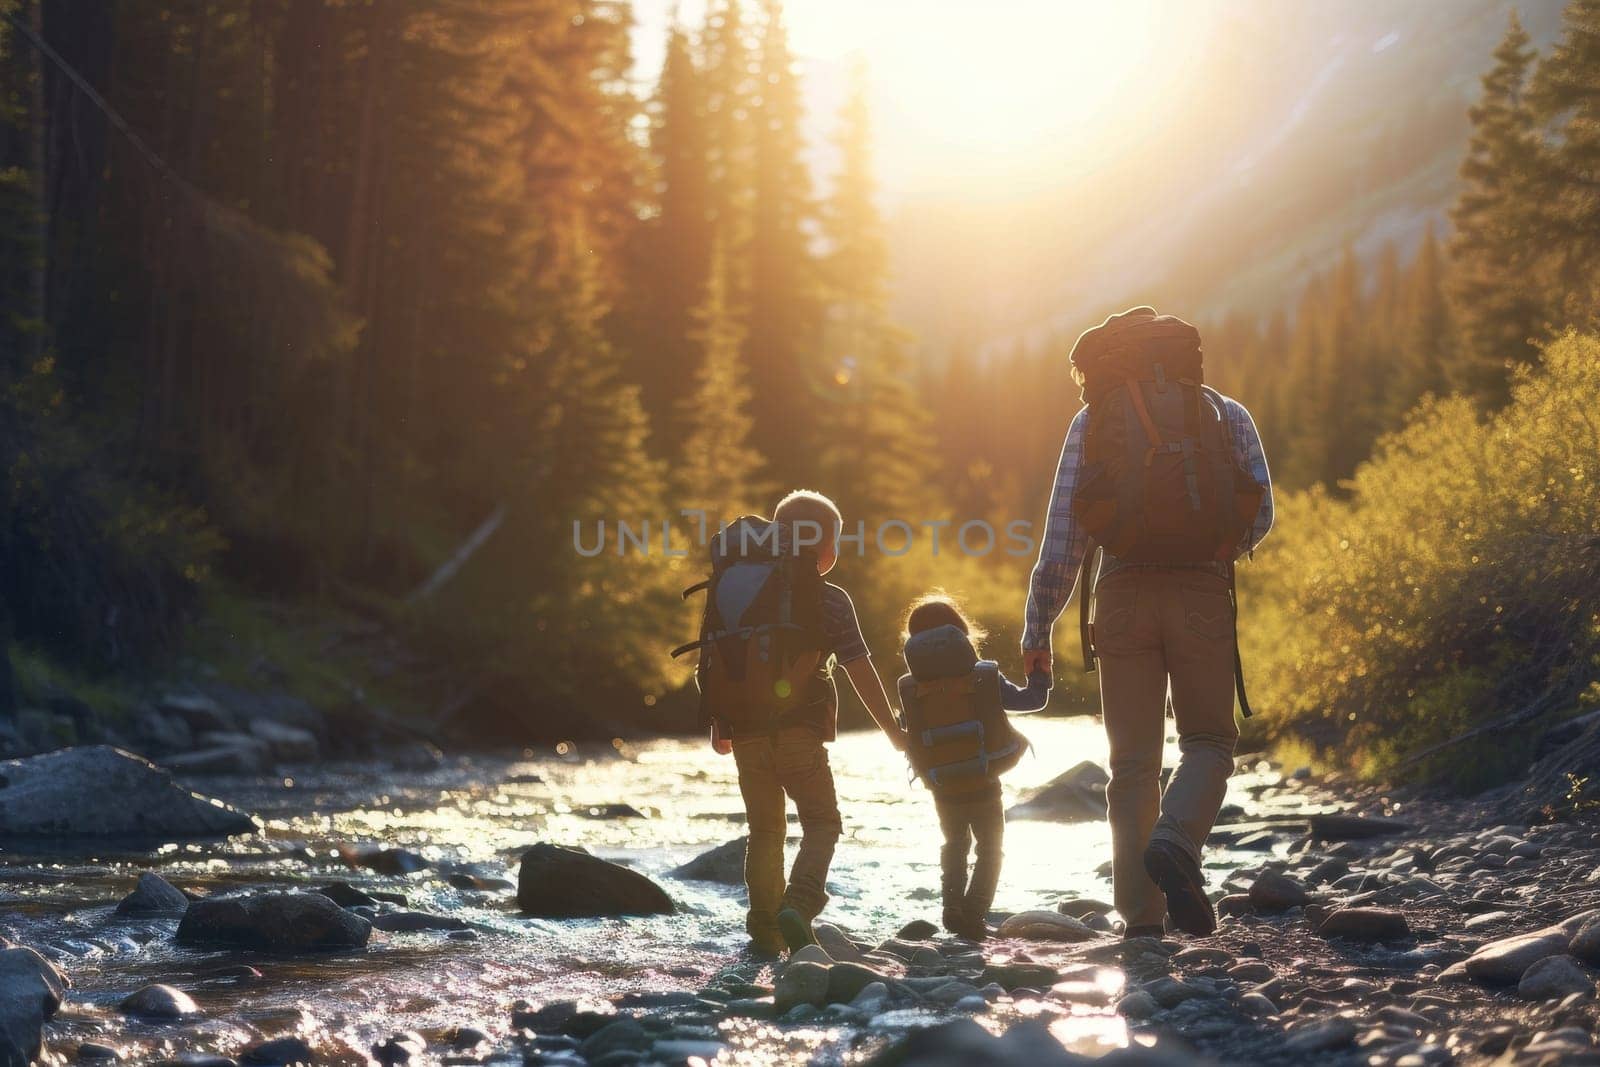 Family with backpacks trekking along a river bank, immersed in golden sunset light filtering through forest trees